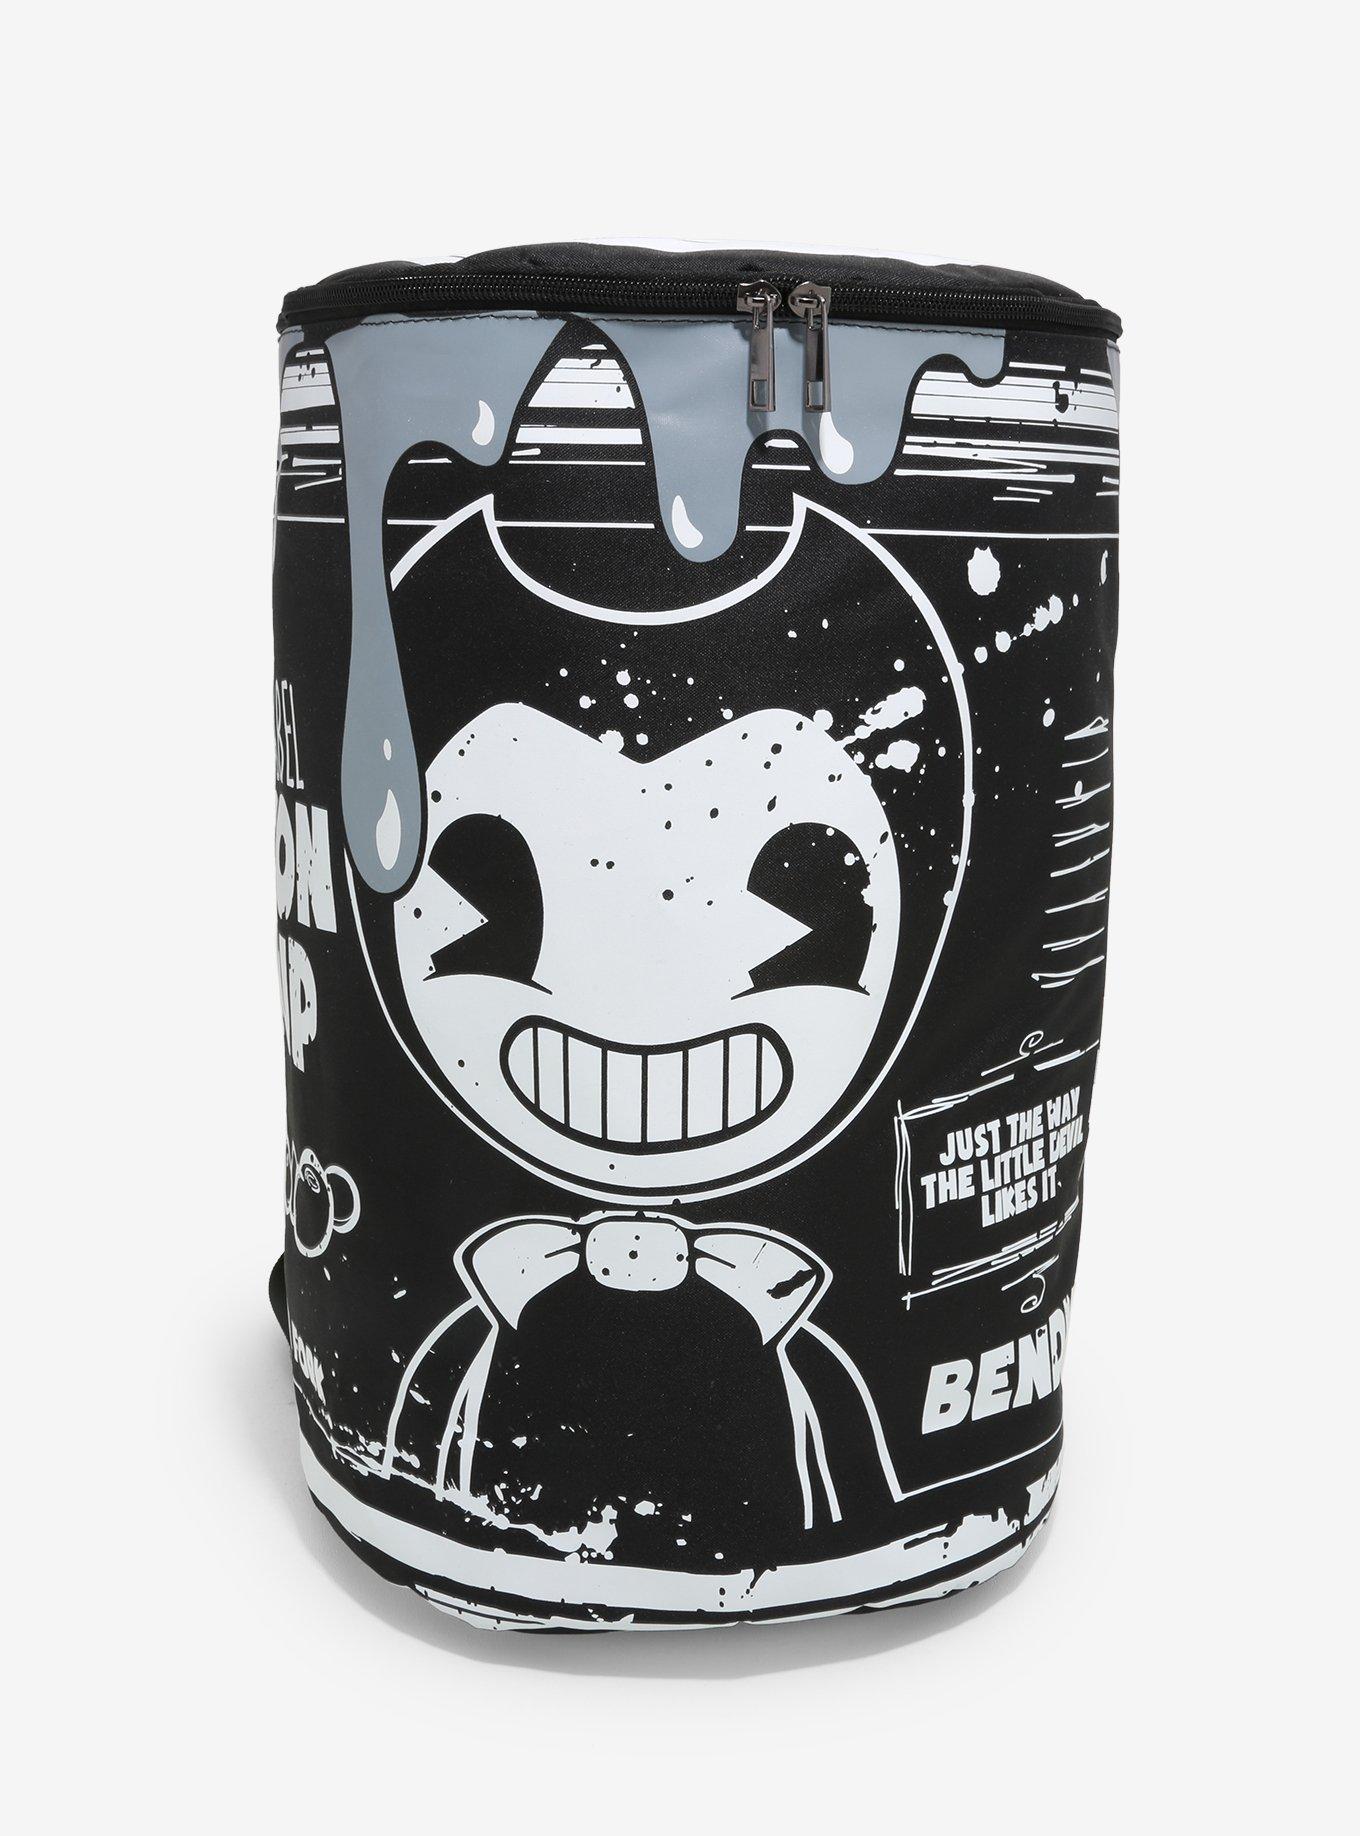 Bendy and the Ink Machine Mini Figures Bacon Soup Can Blind with